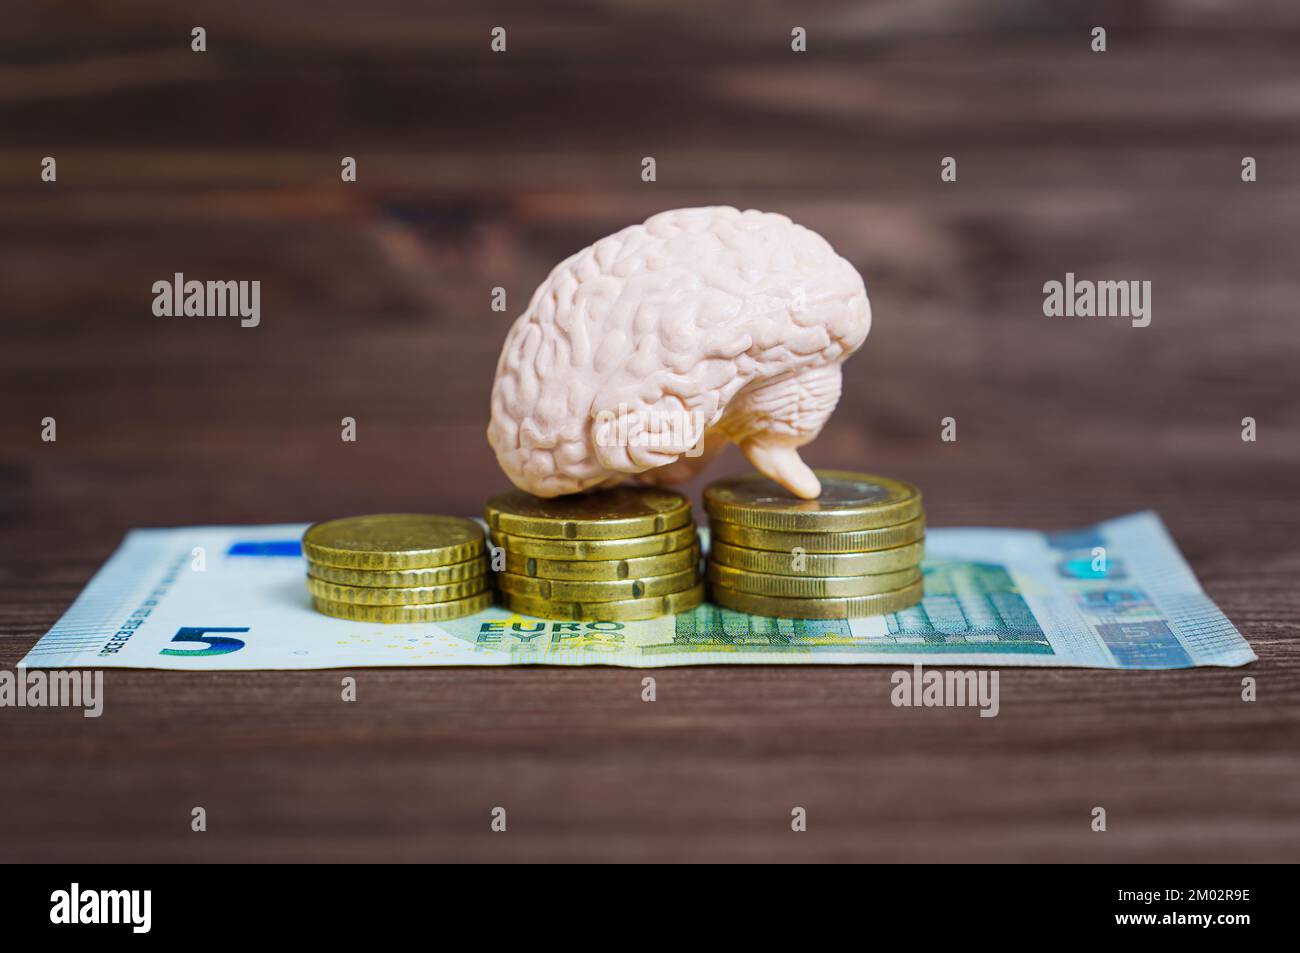 Anatomical copy of a human brain placed on euro coins stacks on a wooden table. Wise investment decisions concept. Stock Photo